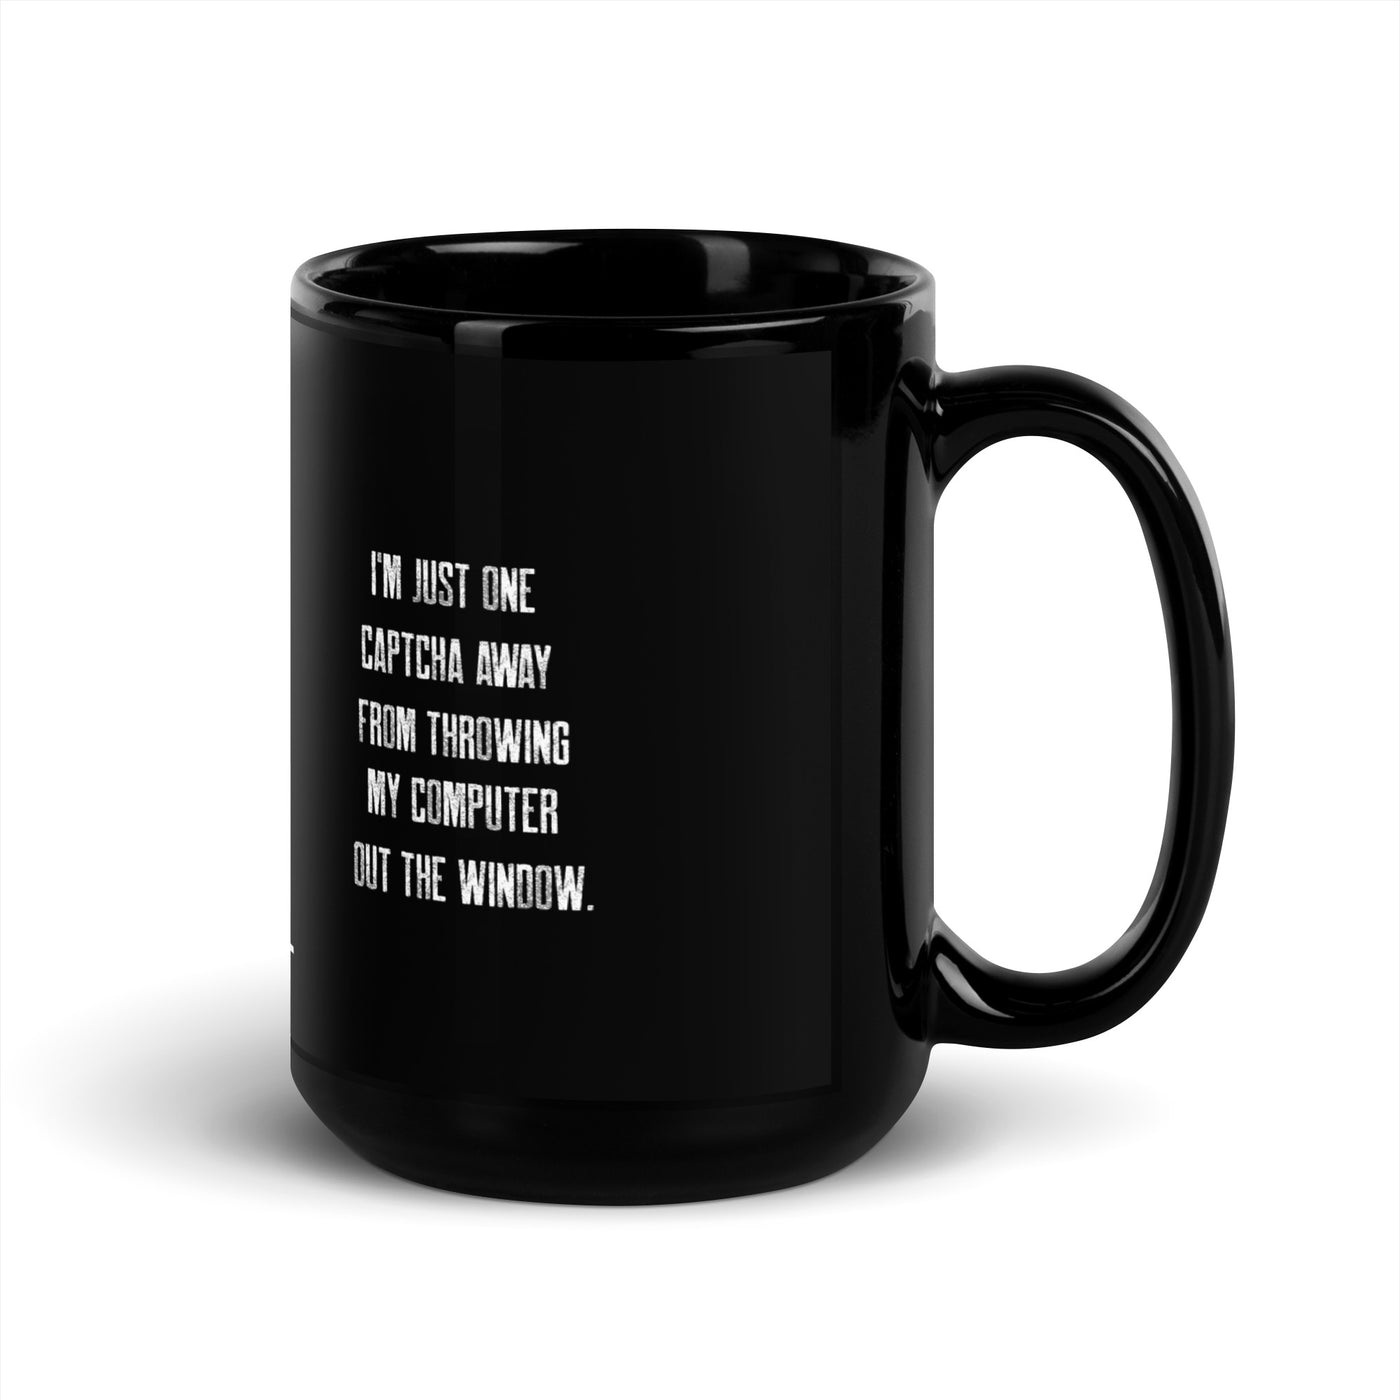 I'm Just one CAPTCHA away from throwing my Computer away V1 - Black Glossy Mug